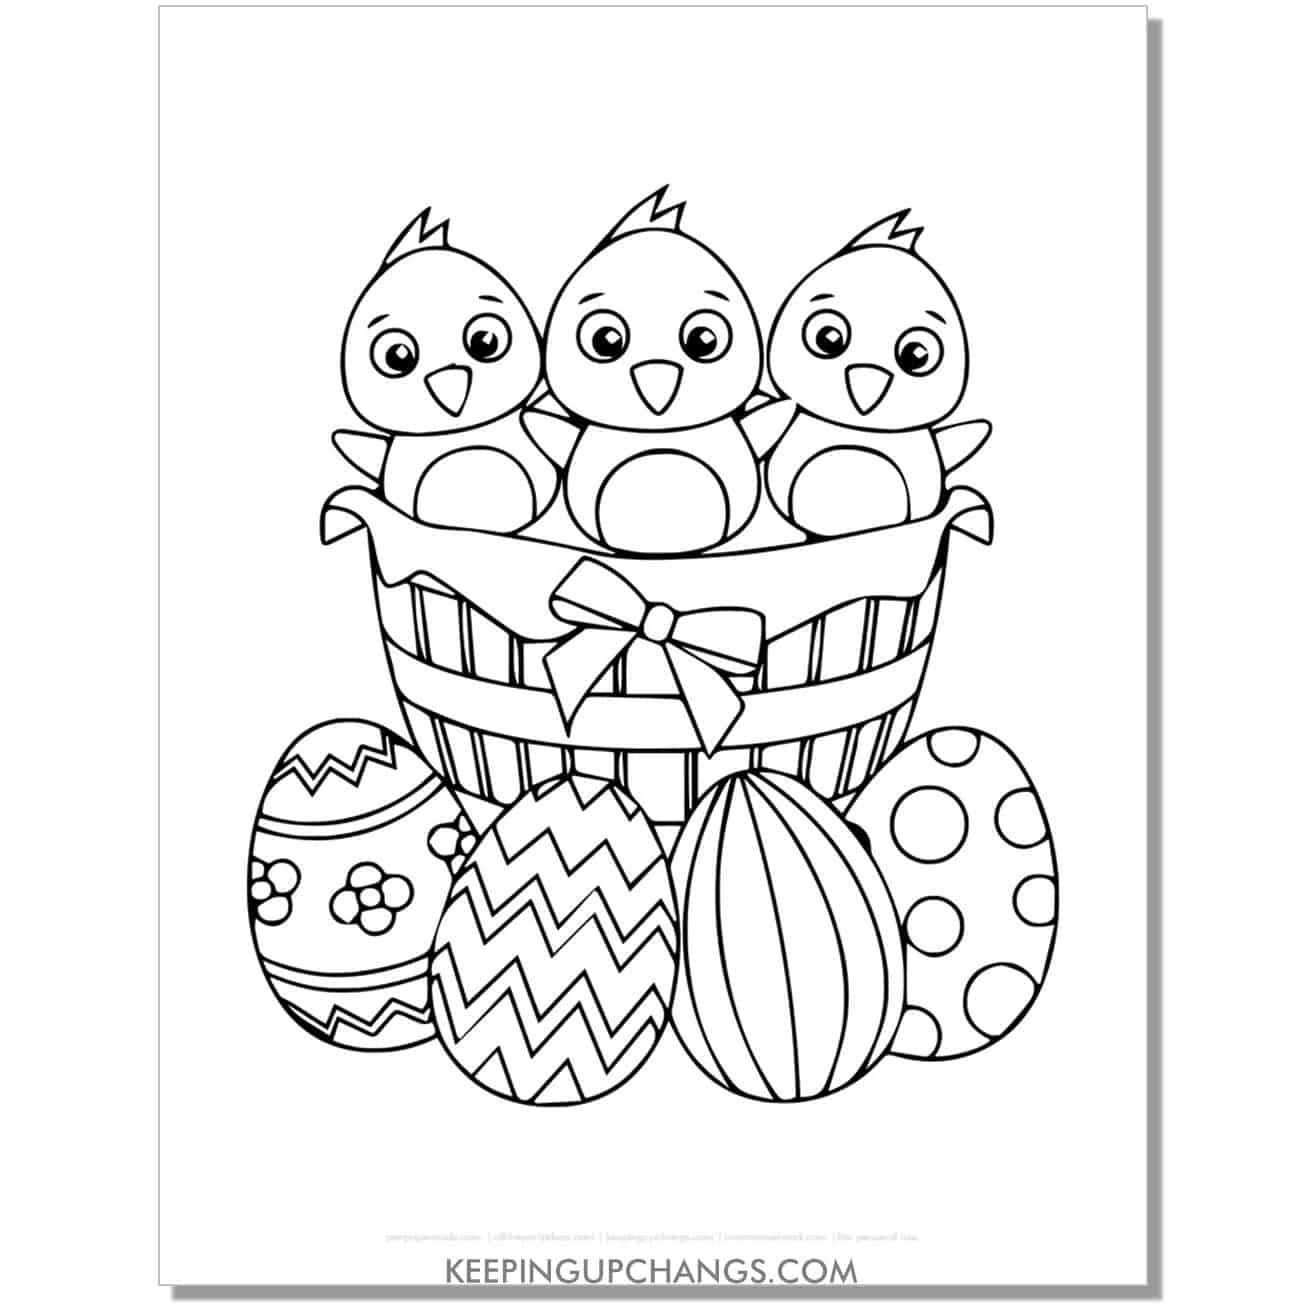 baby chicks flapping wings in basket with eggs outside basket coloring page, sheet.